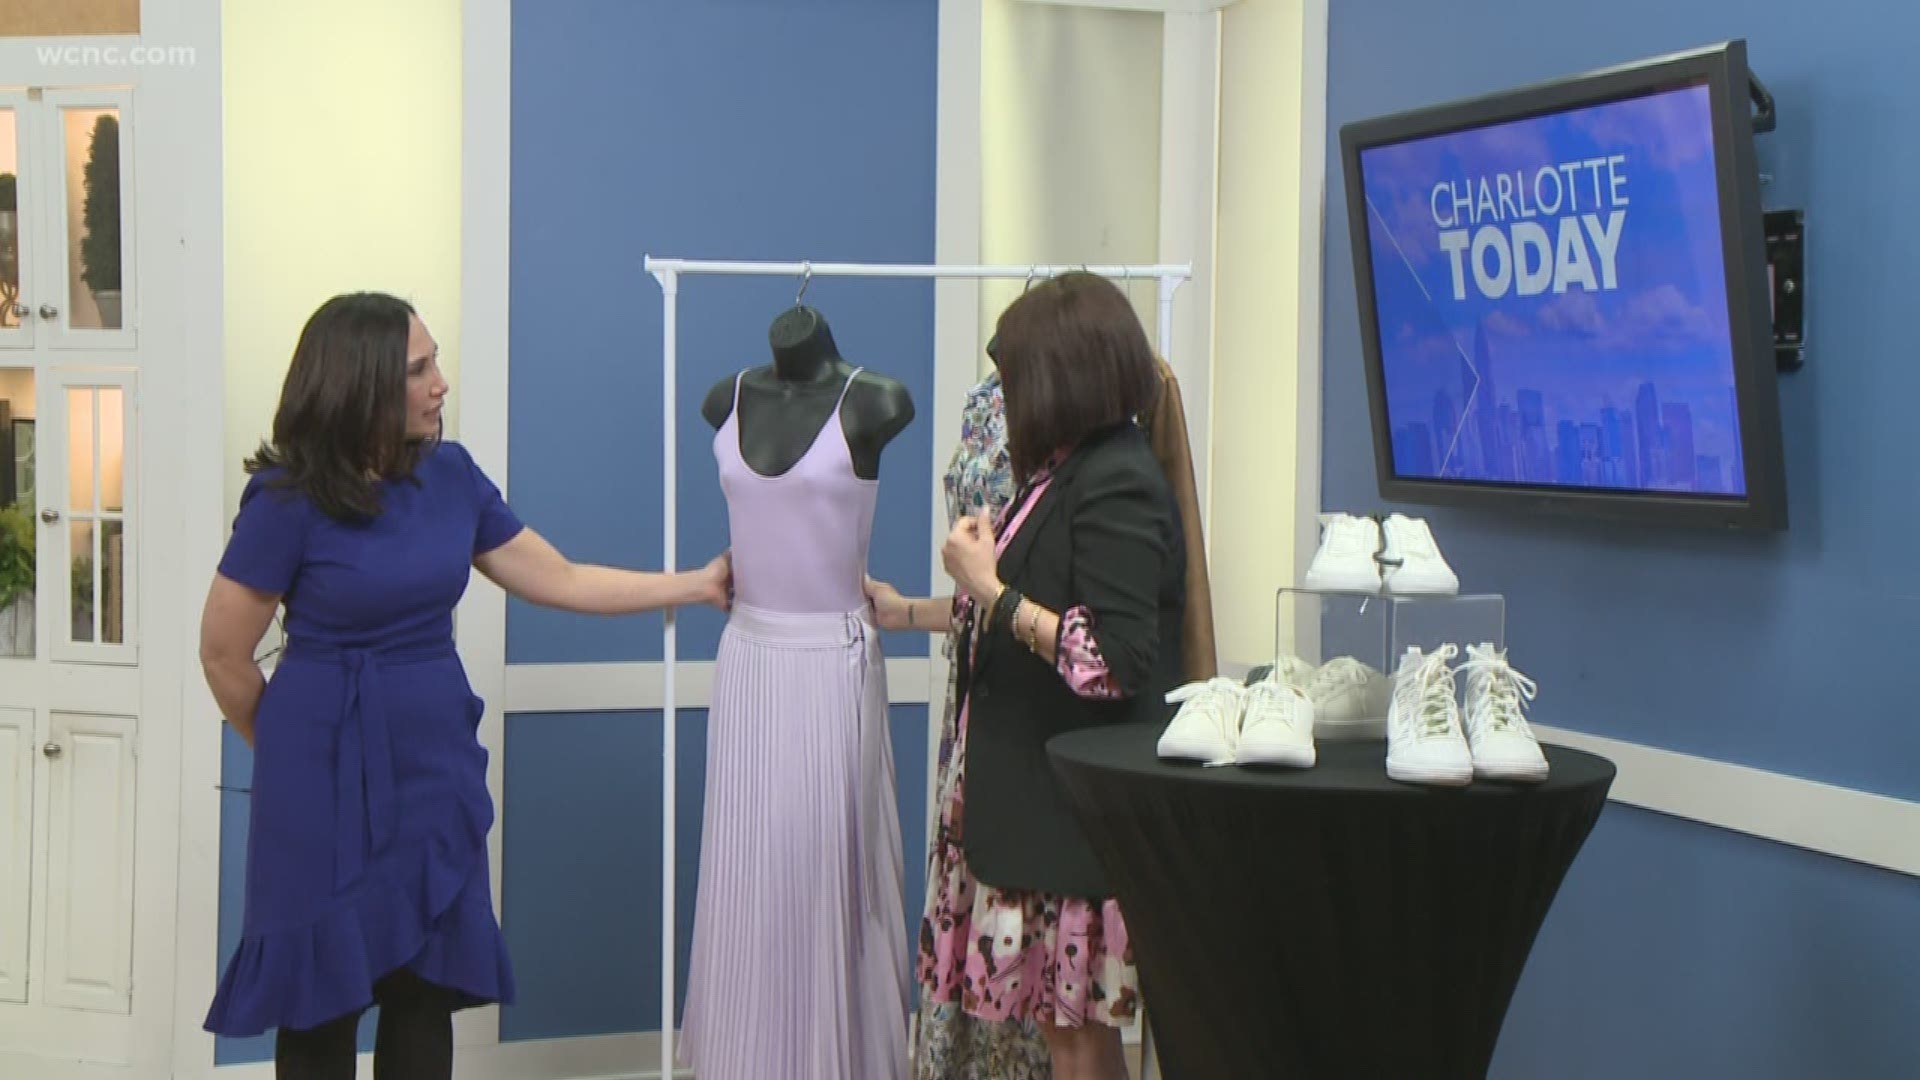 Stylist and owner of CLTCH, Linda Martinez, talks about pastels, white and floral in spring fashion.